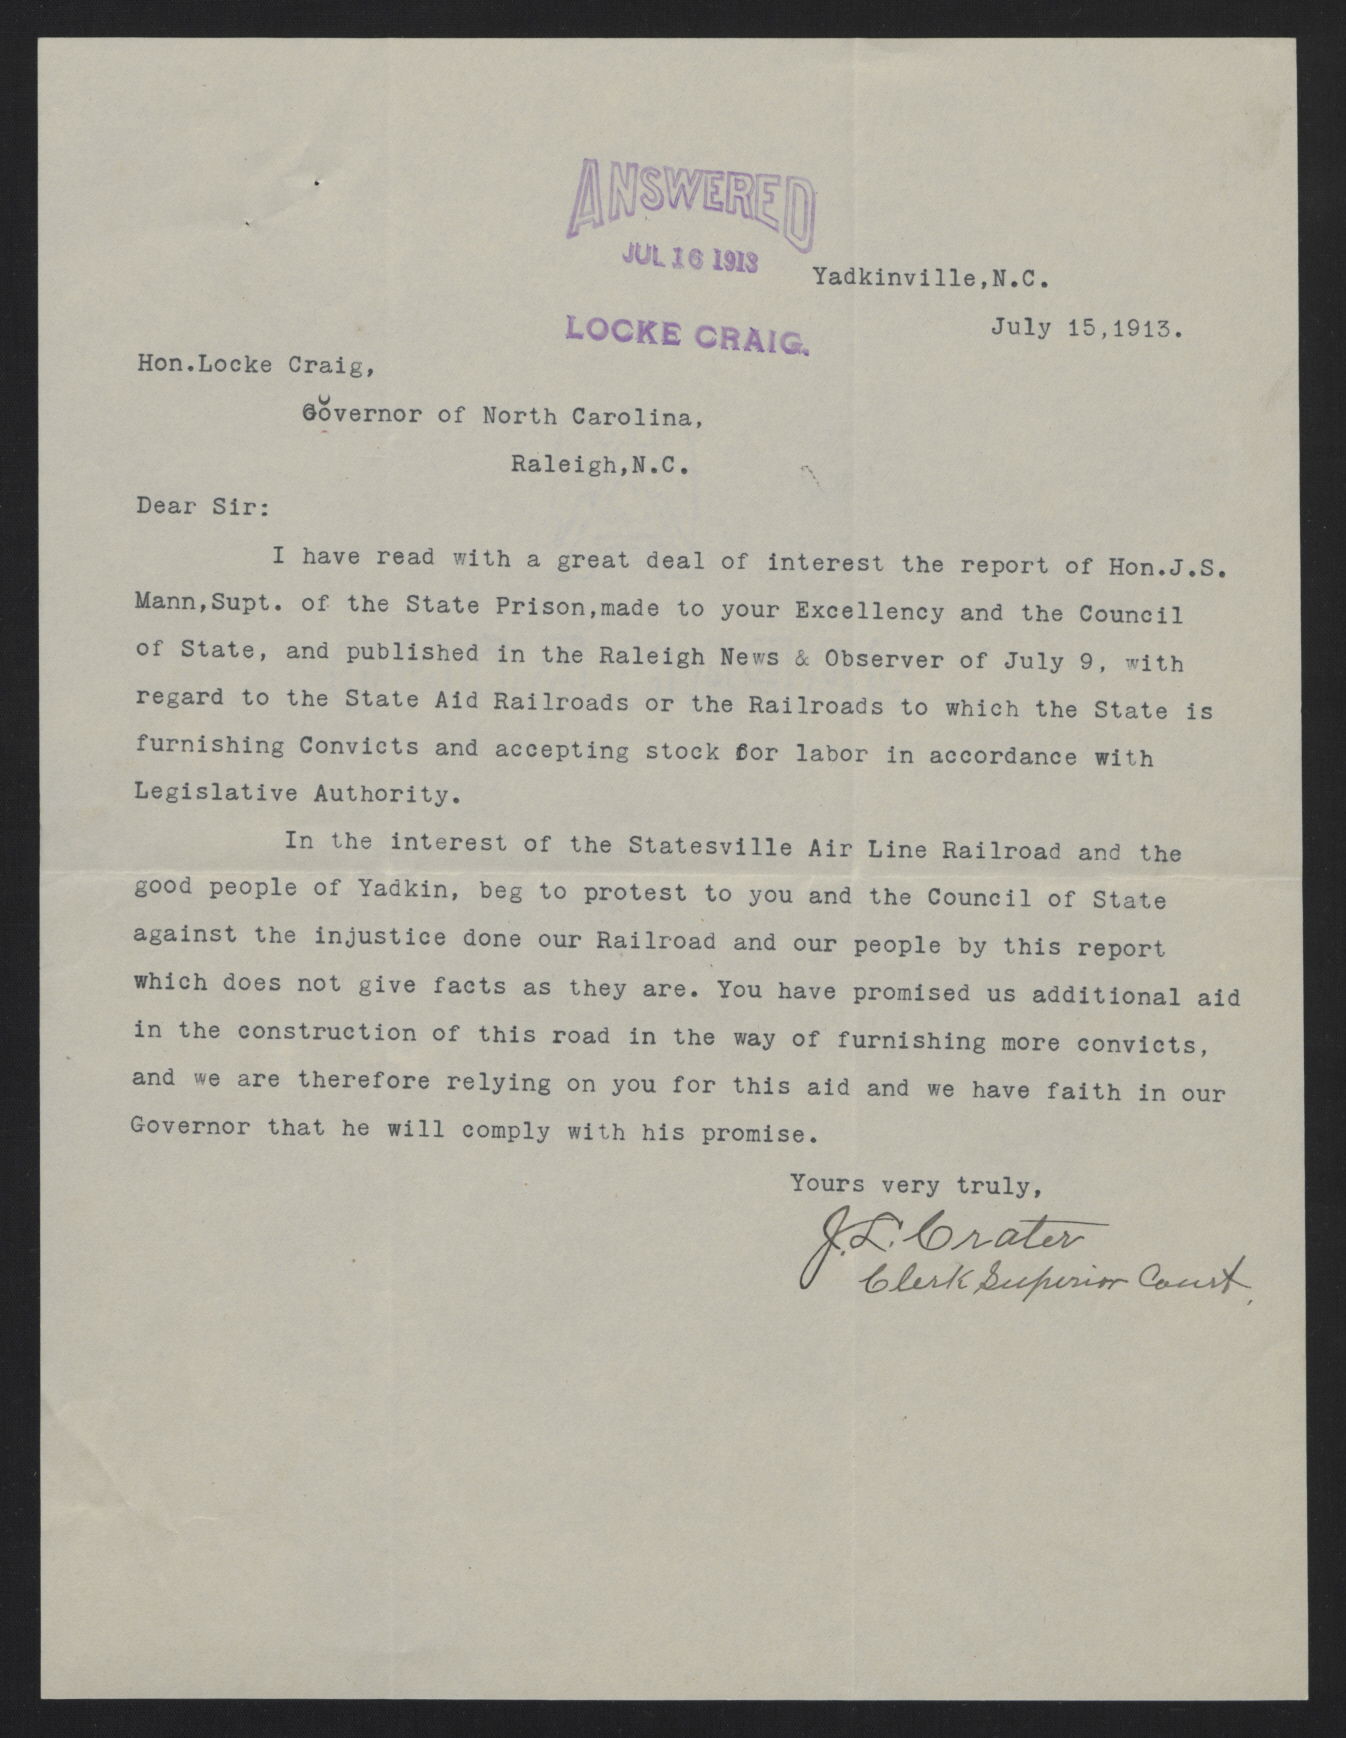 Letter from Crater to Craig, July 15, 1913